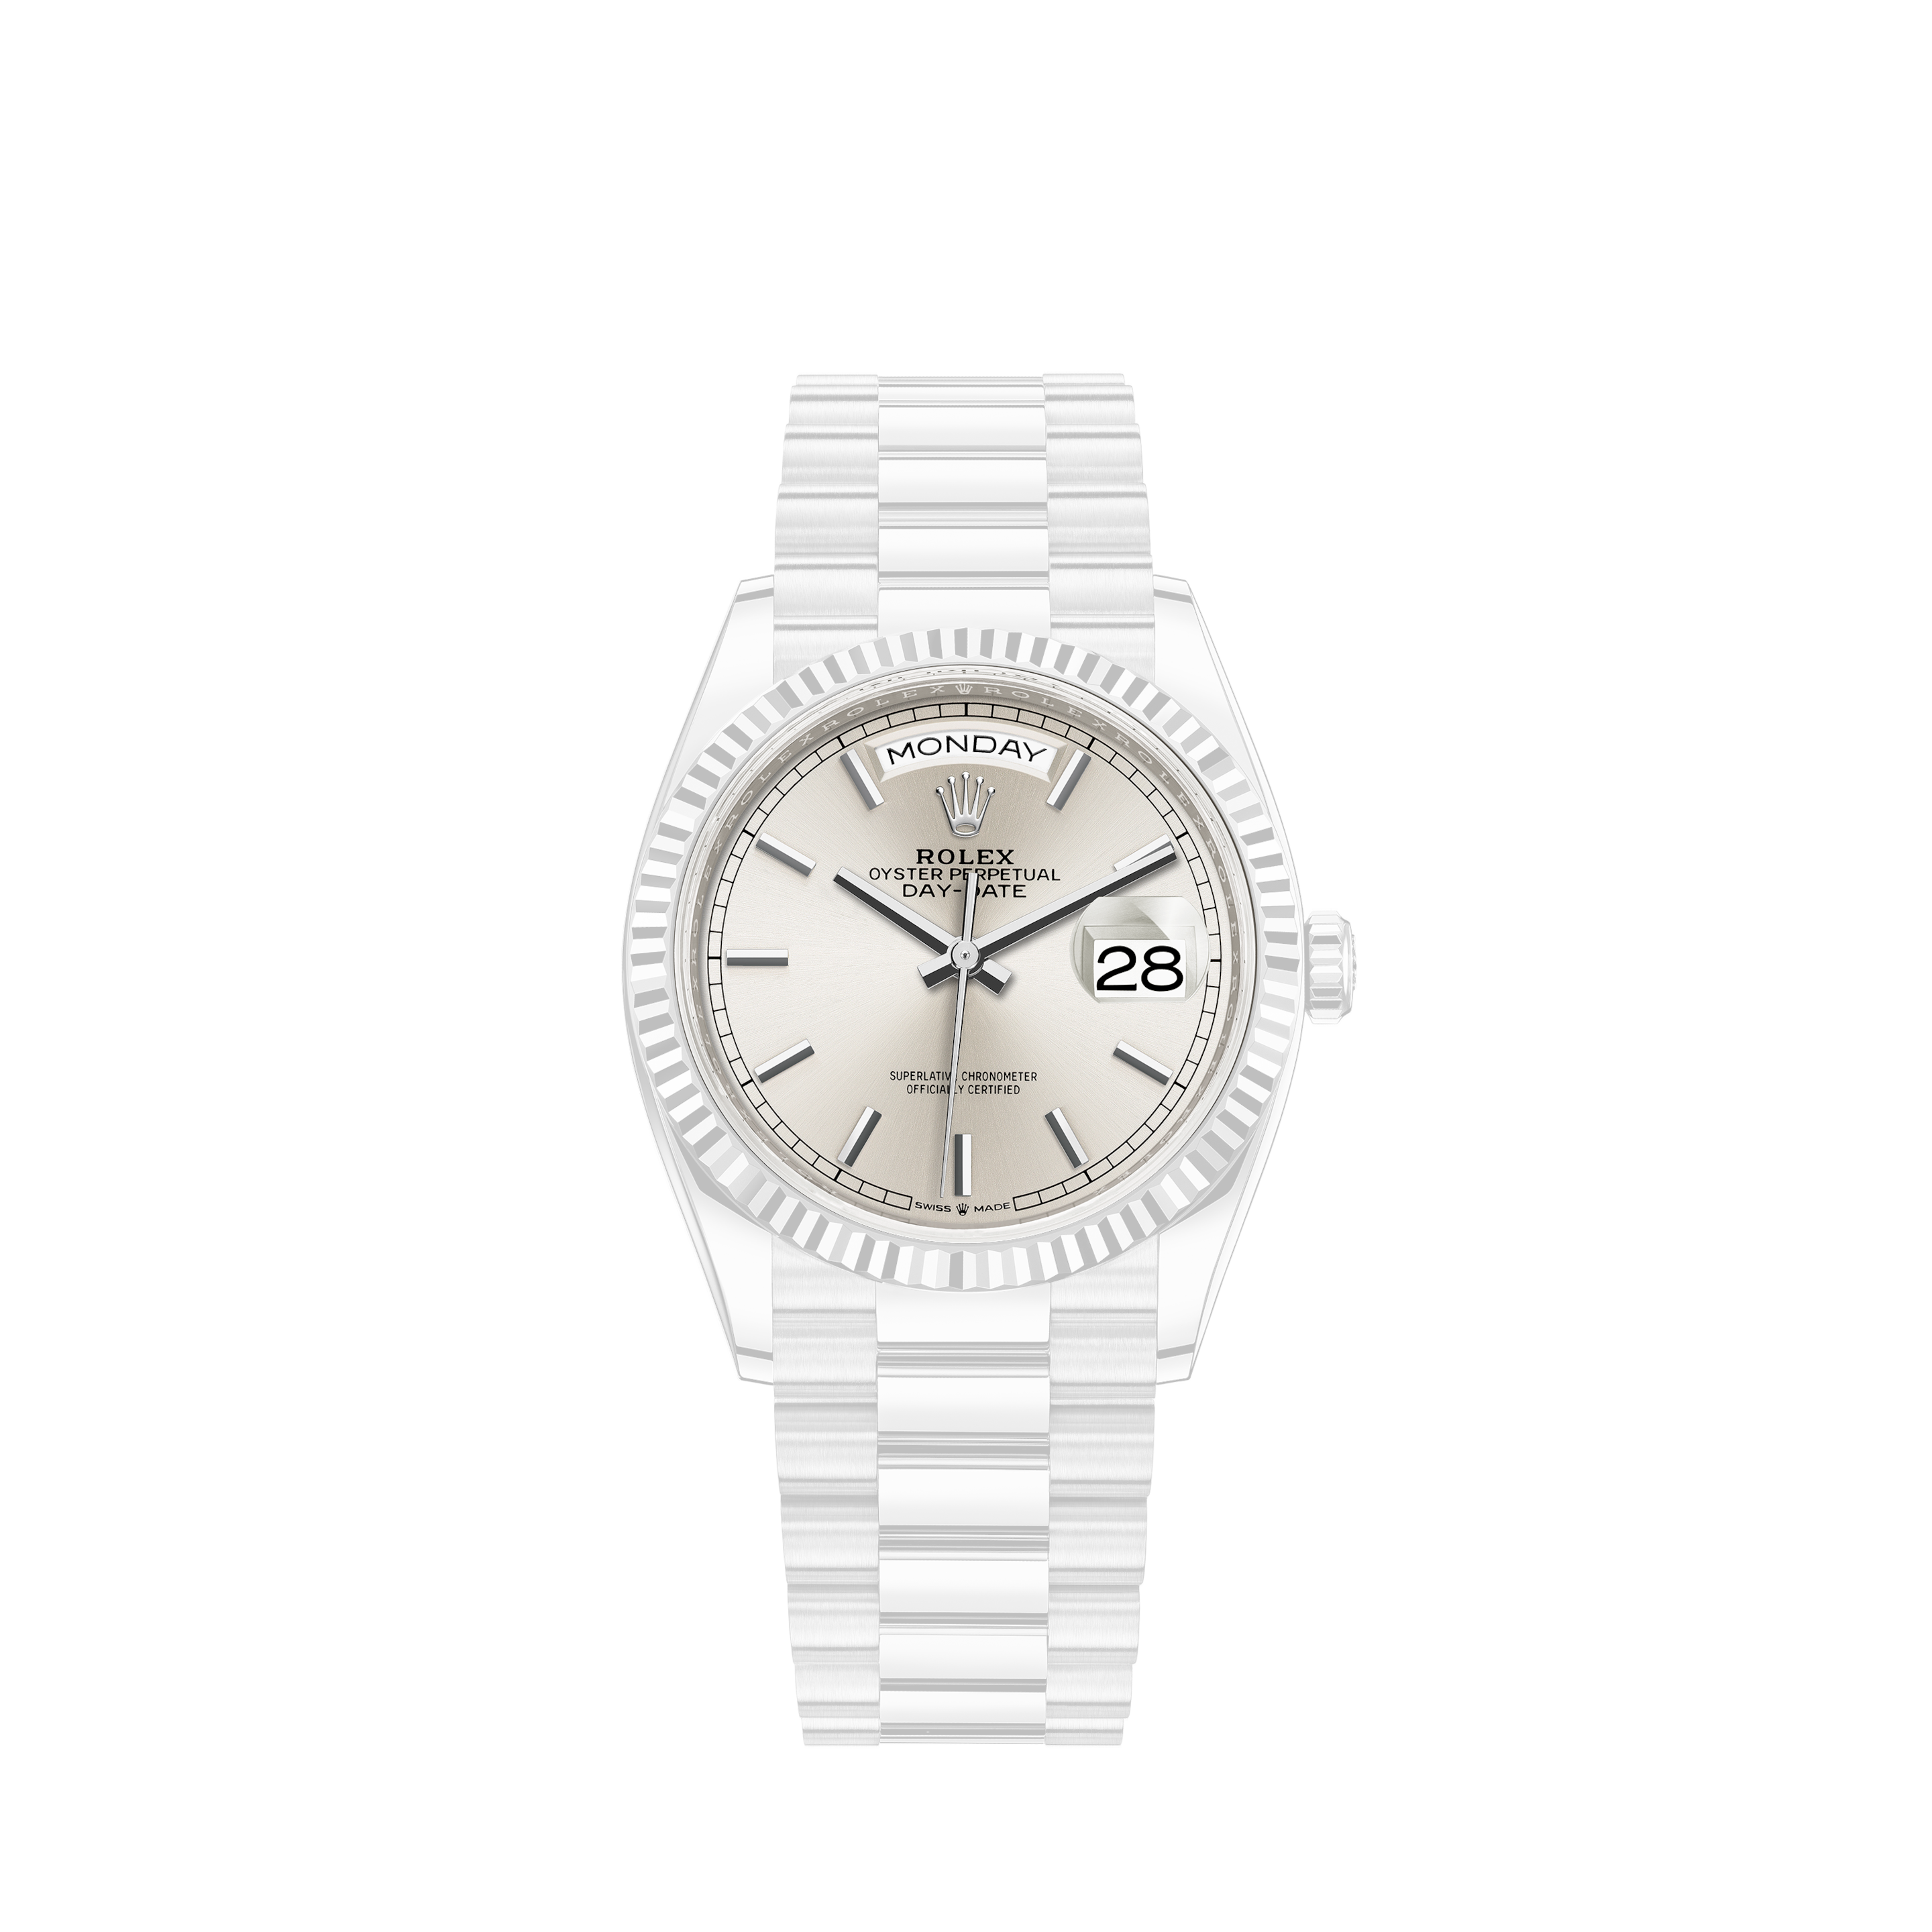 Rolex Lady Datejust 26 - 69173 in excellent condition